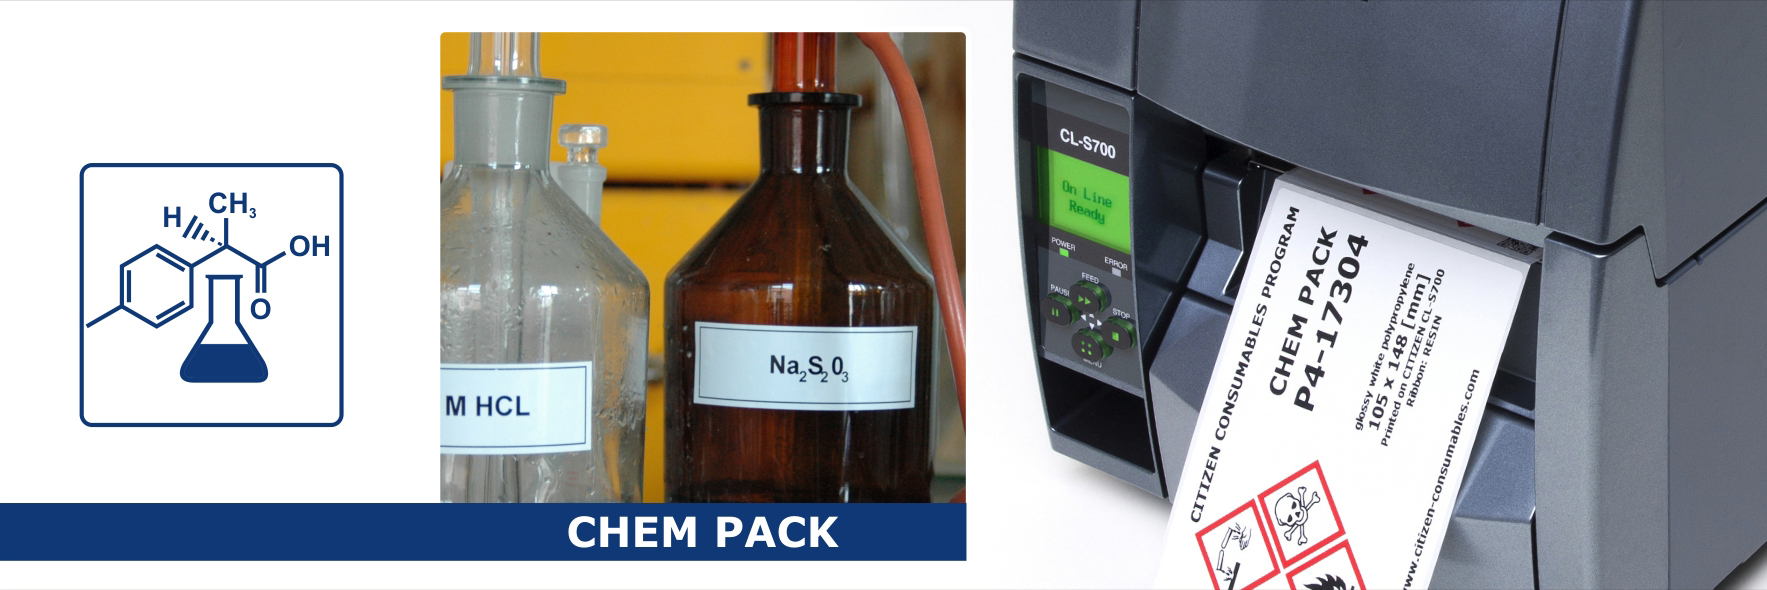 Chem Pack – a solution dedicated for chemical industry